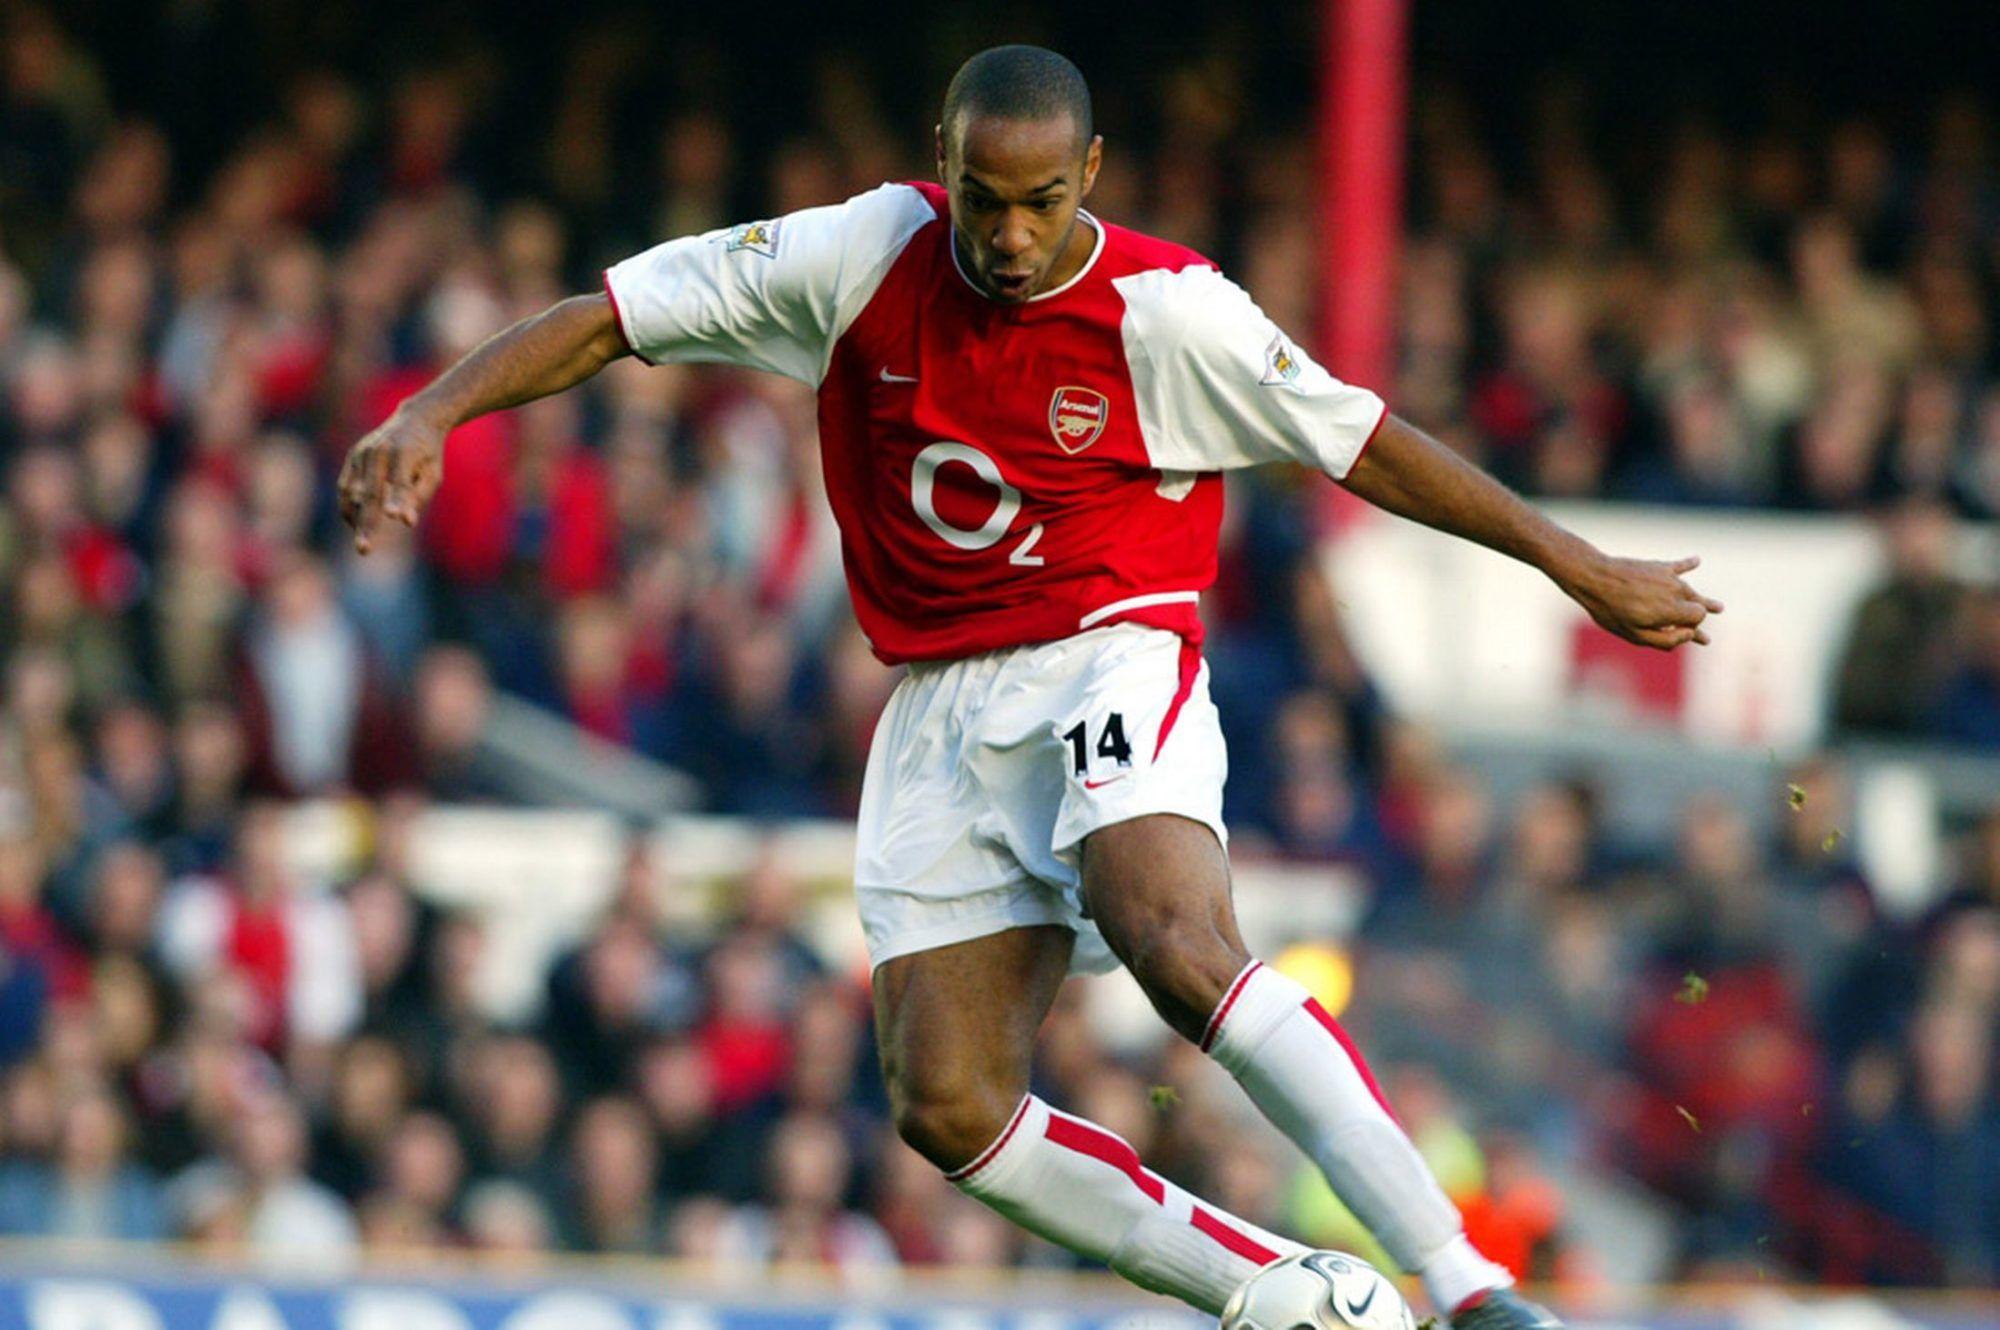 Thierry Henry Wallpaper Hd